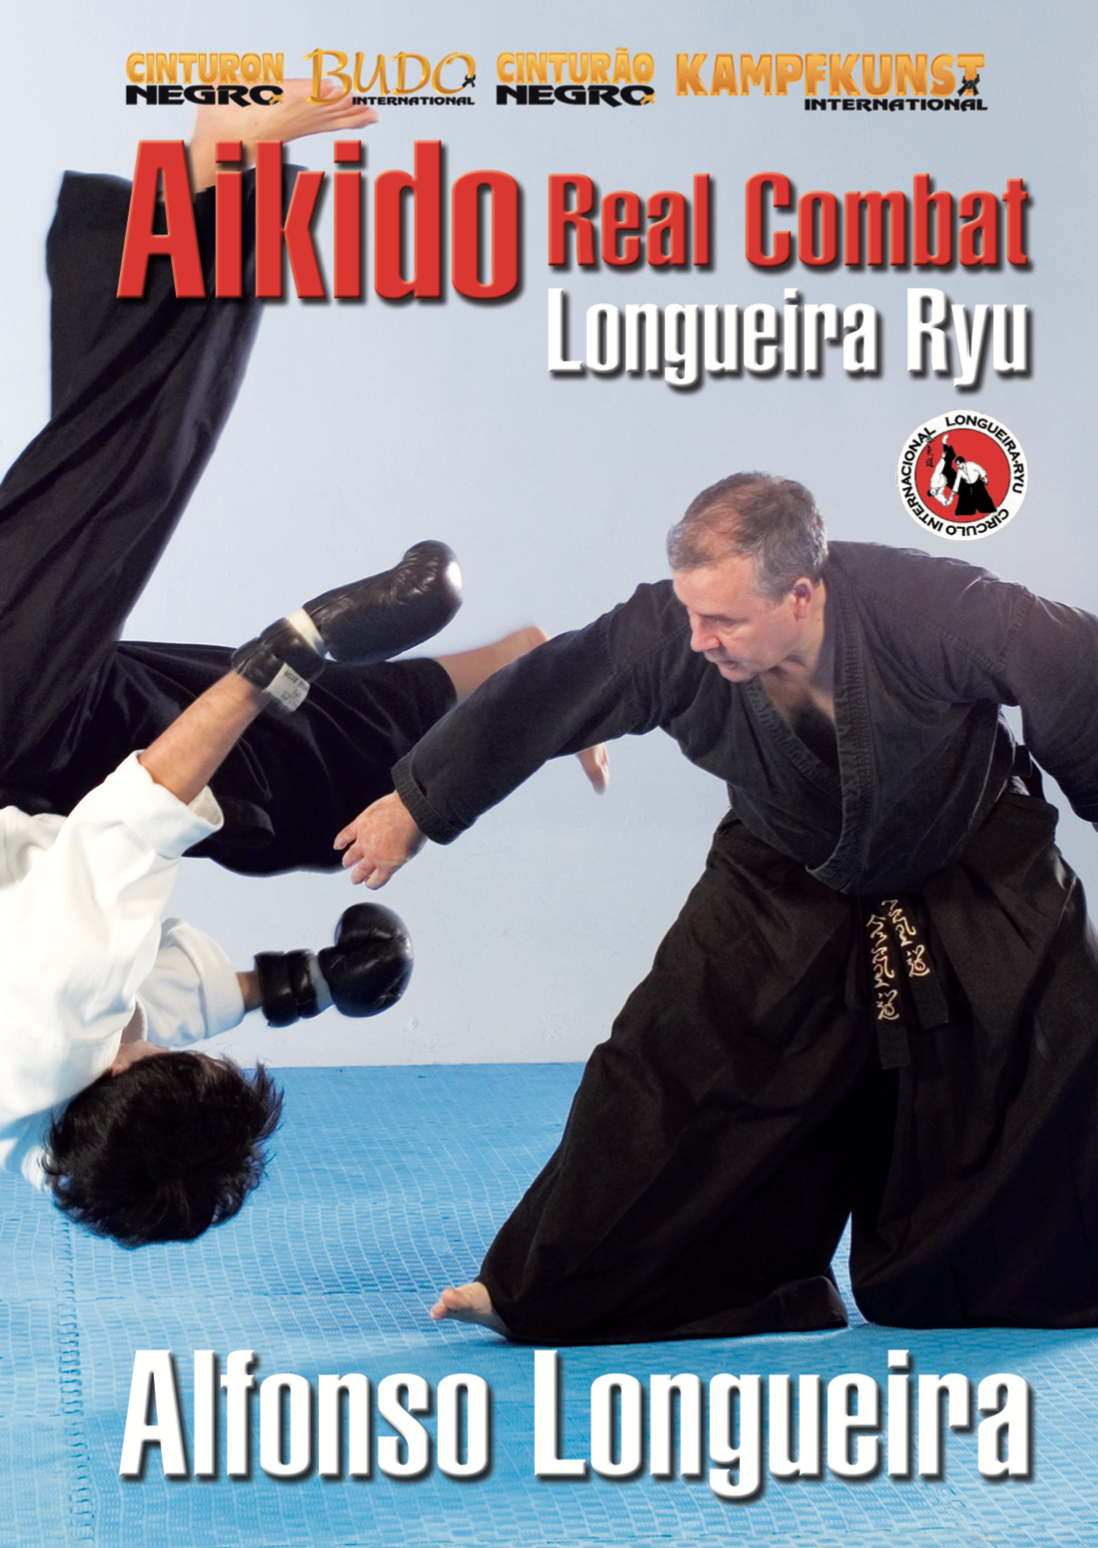 Aikido Combat Vol 1 DVD by Alfonso Longueira - Budovideos